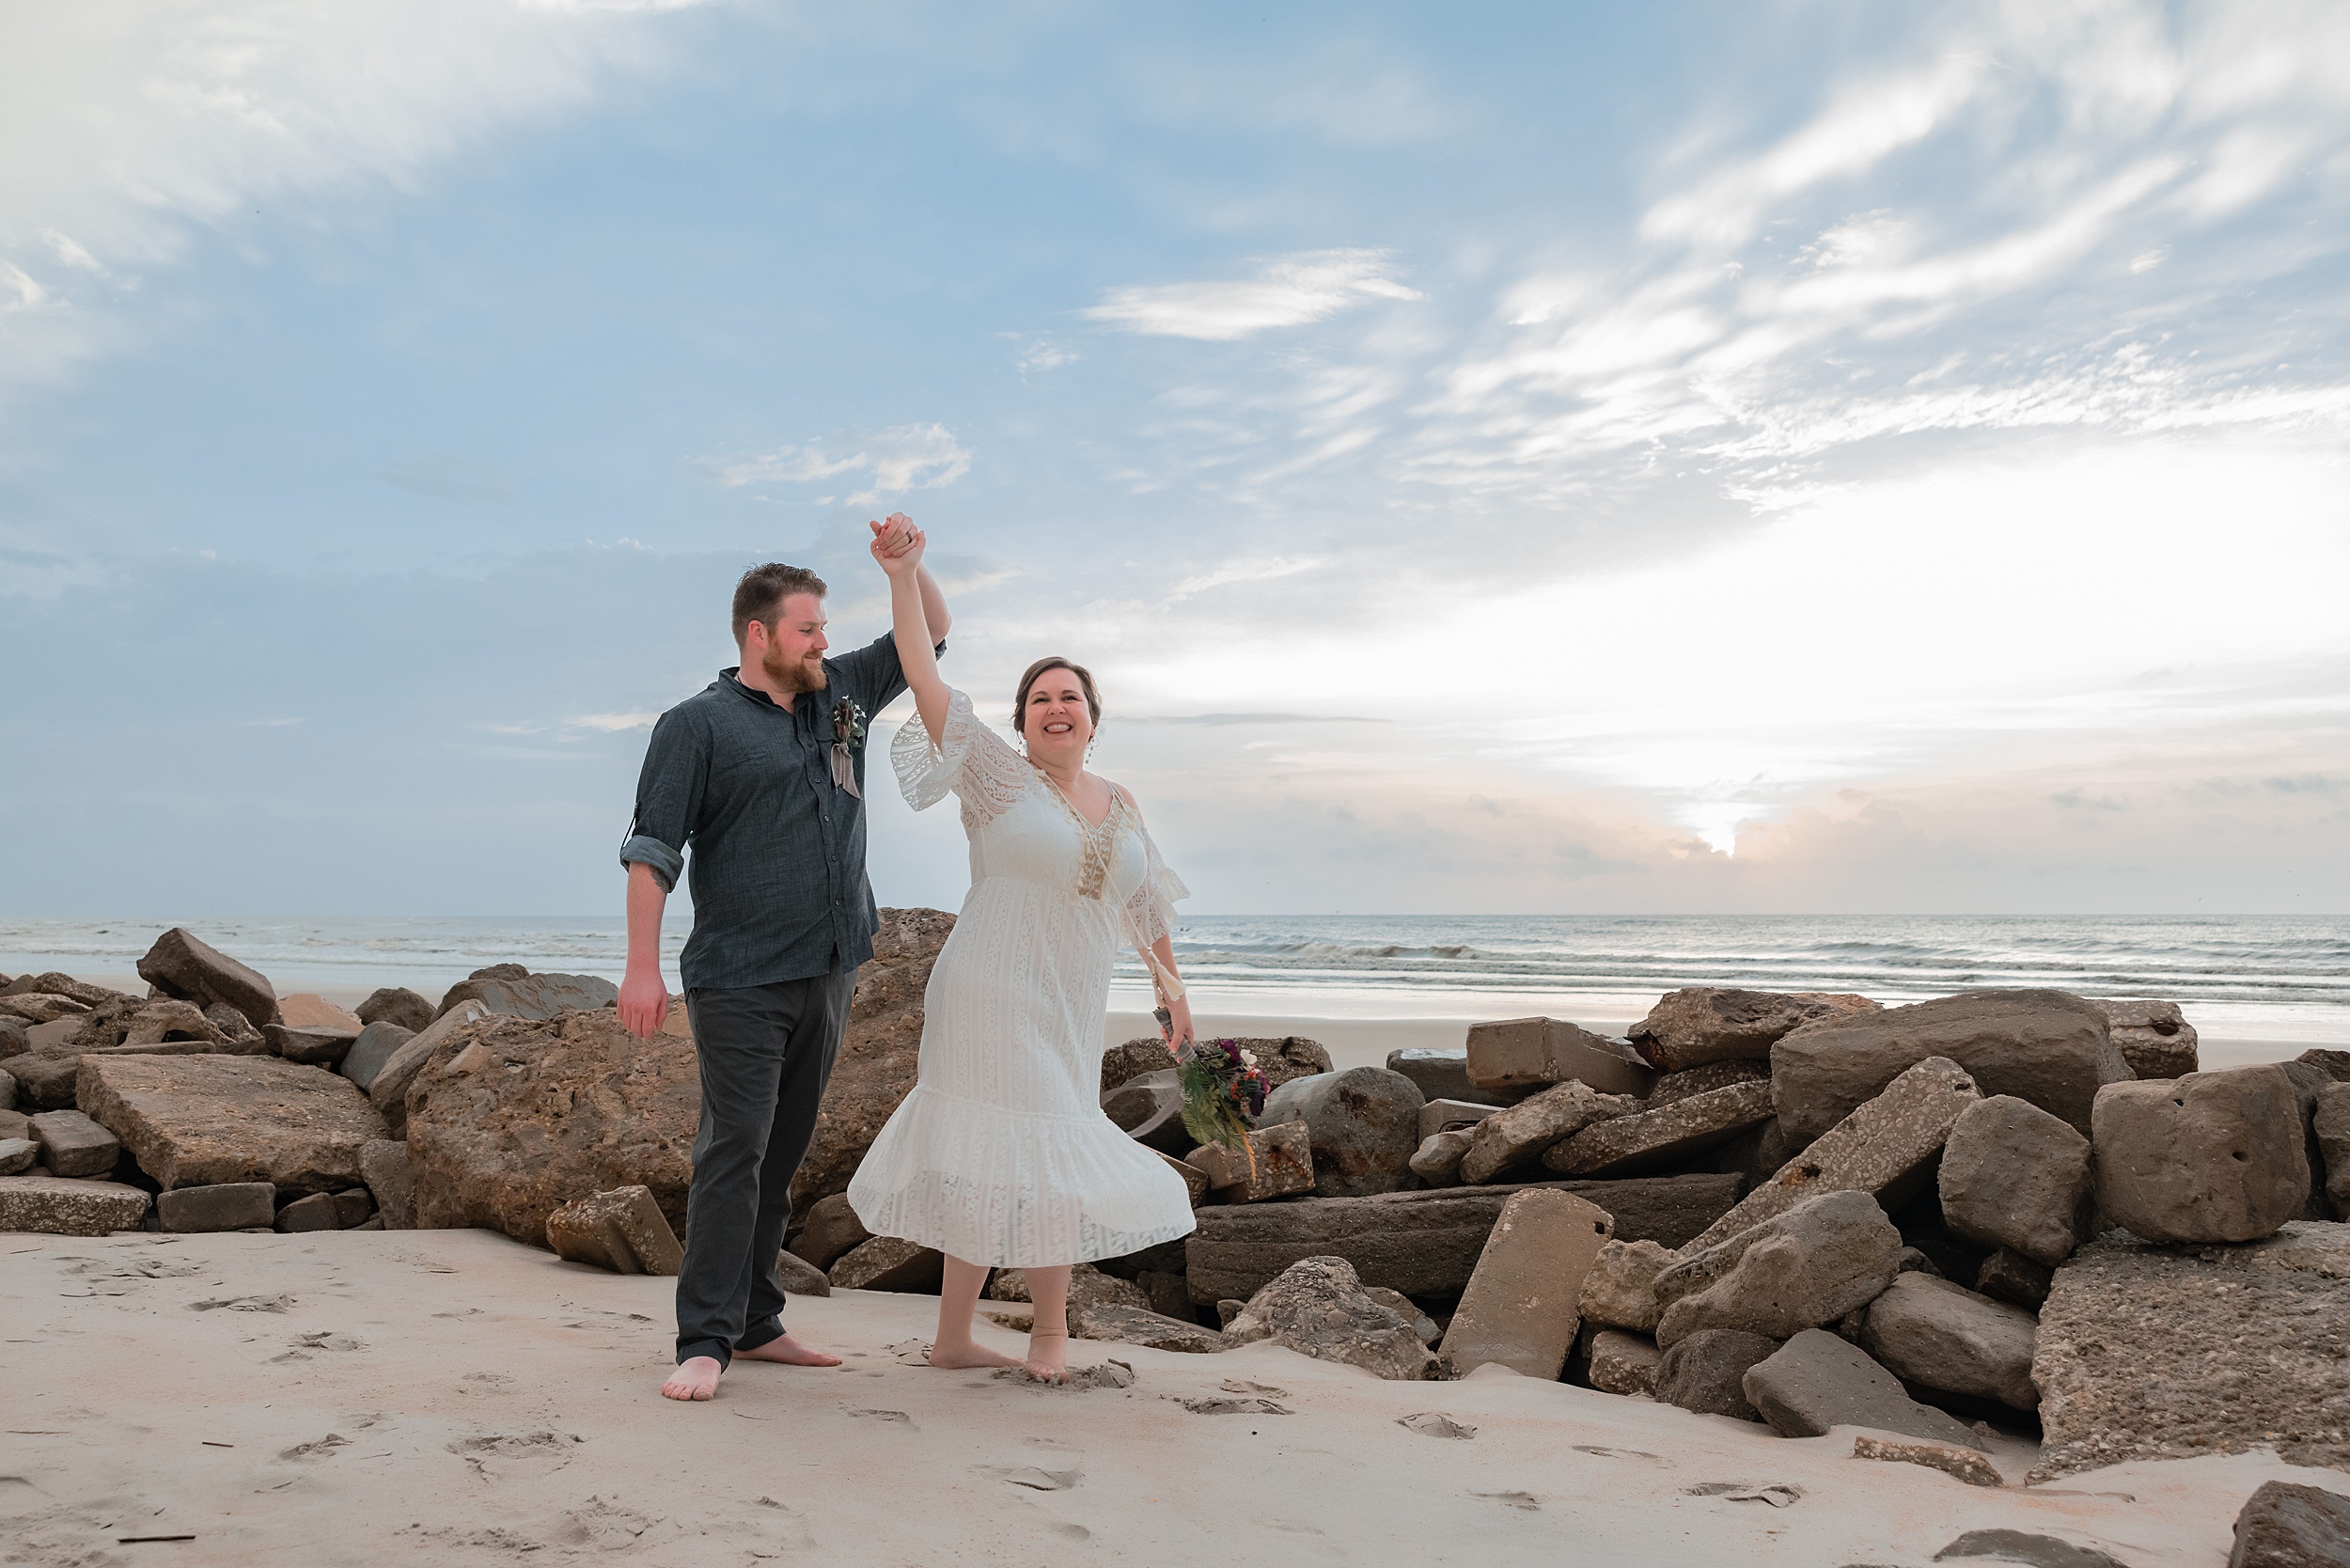 A groom twirls his bride while standing on a beach by some large rocks